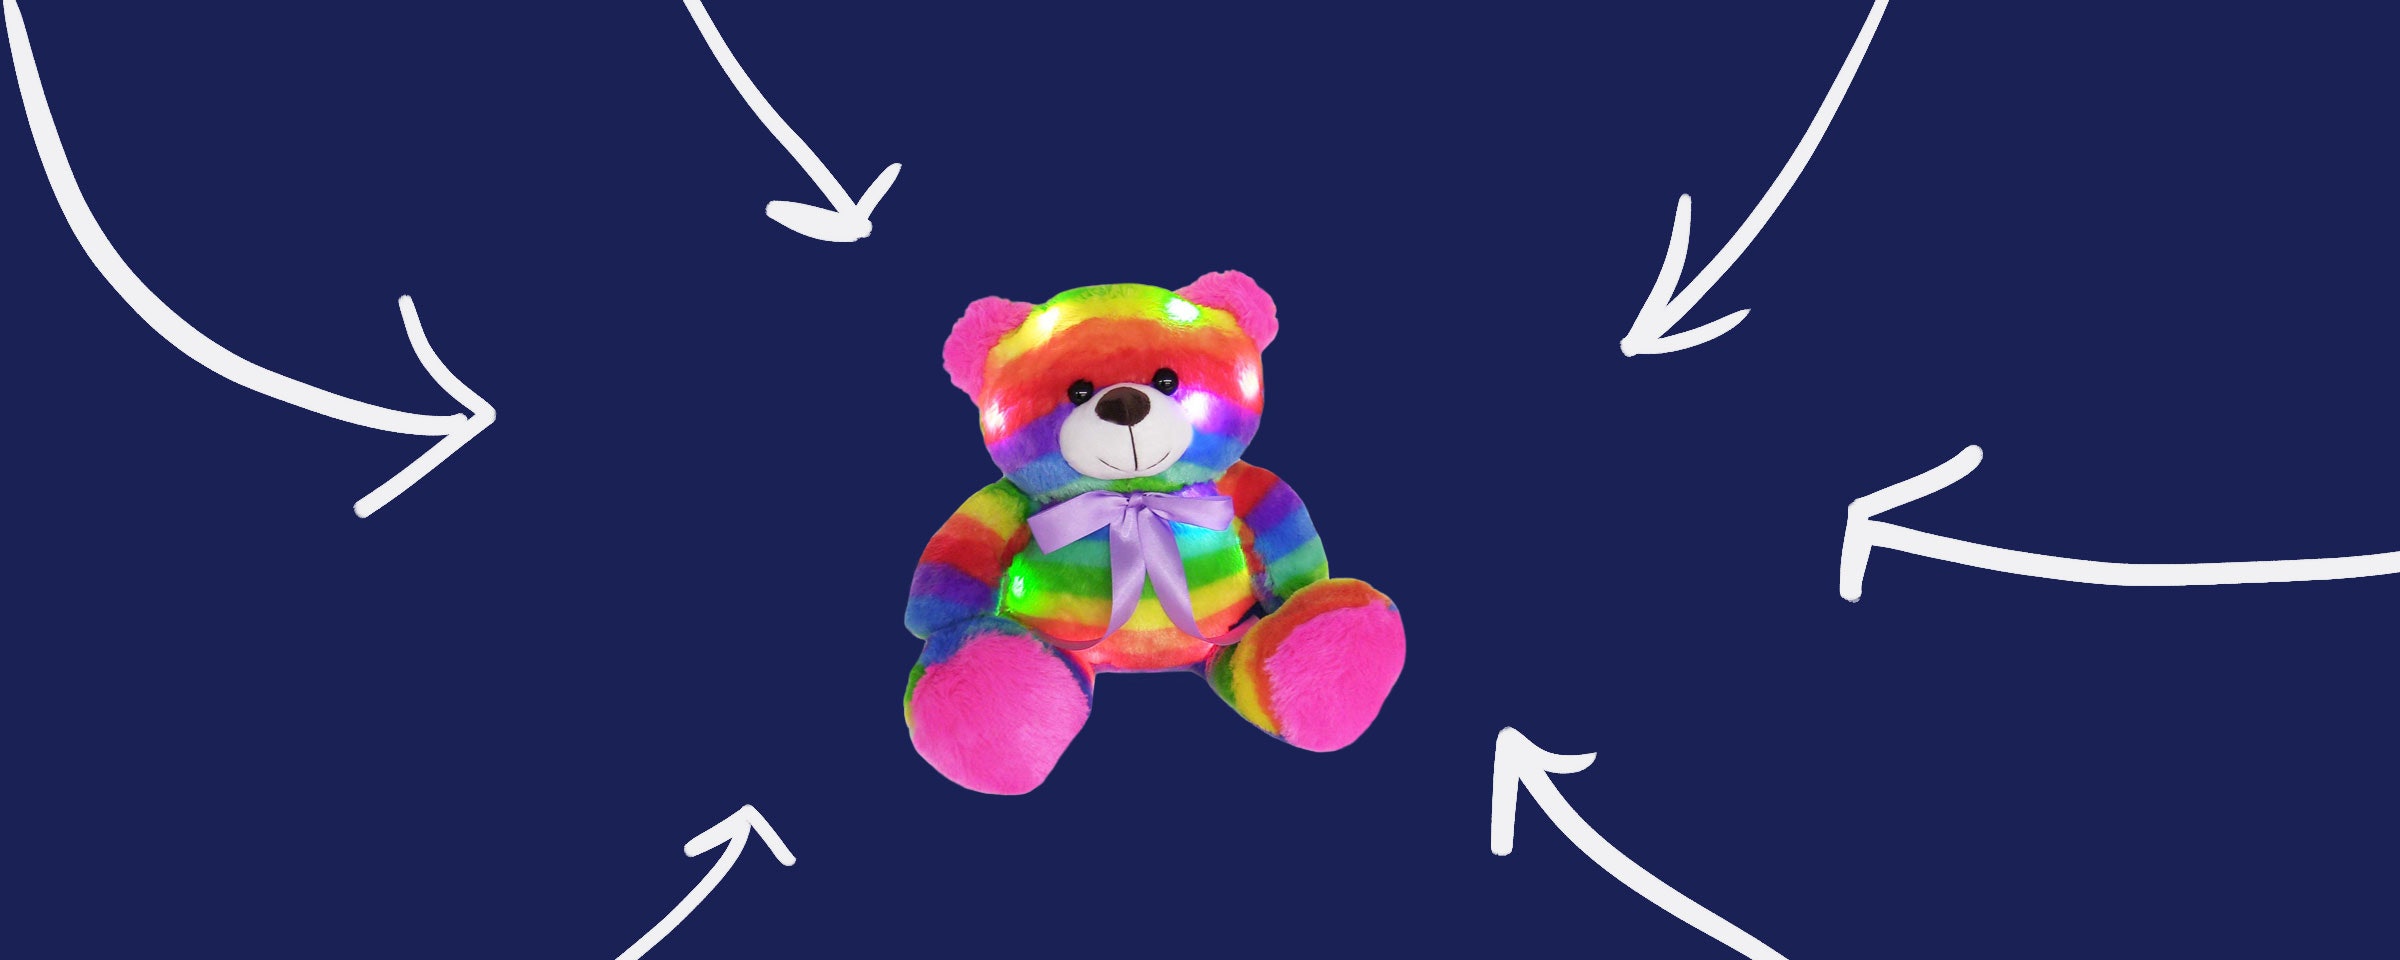 Super Soft Cuddly Glow Teddy Bear Light up Colour Changing Night Light NEW 2019 